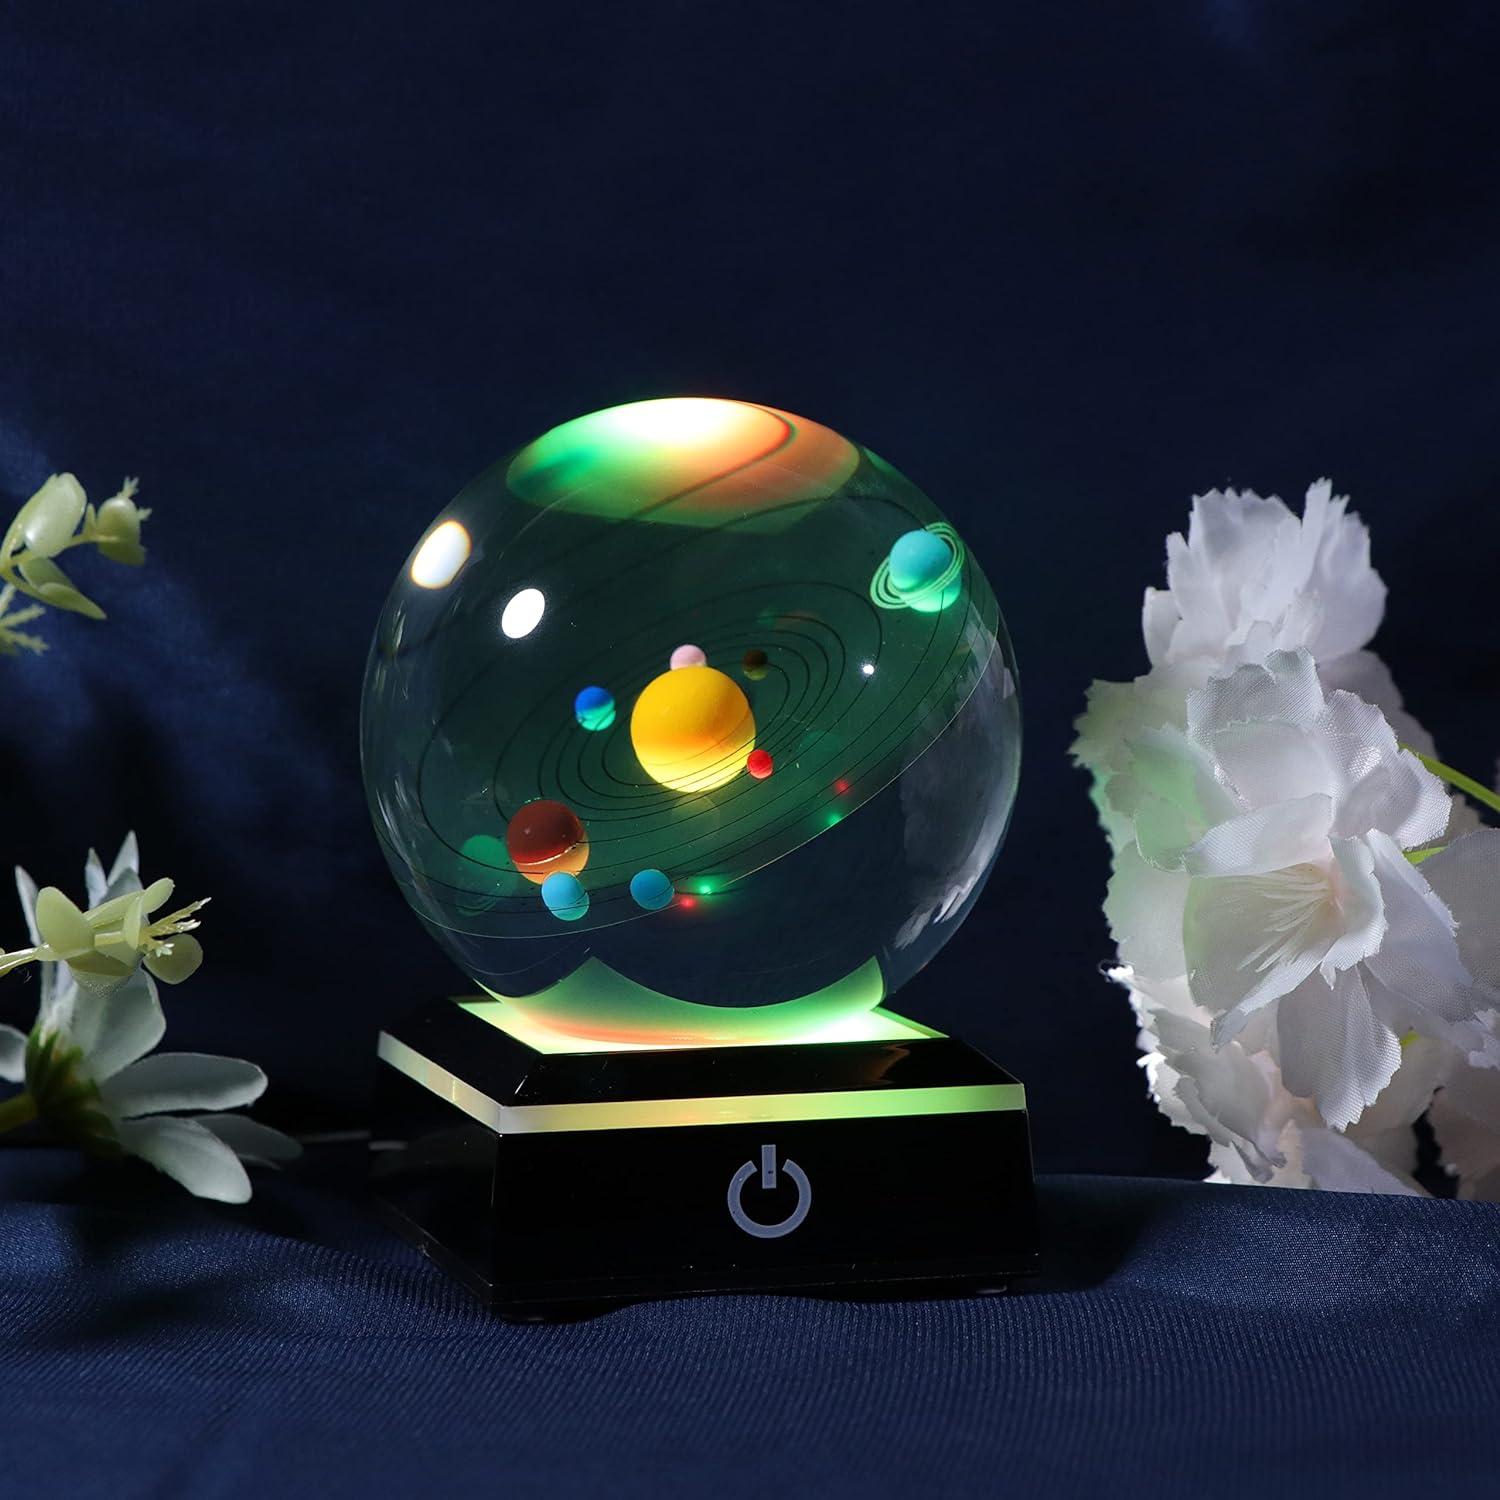 Solar System in Crystal Ball - 3D With Colorful LED - High Quality Materials and Laser Engraving